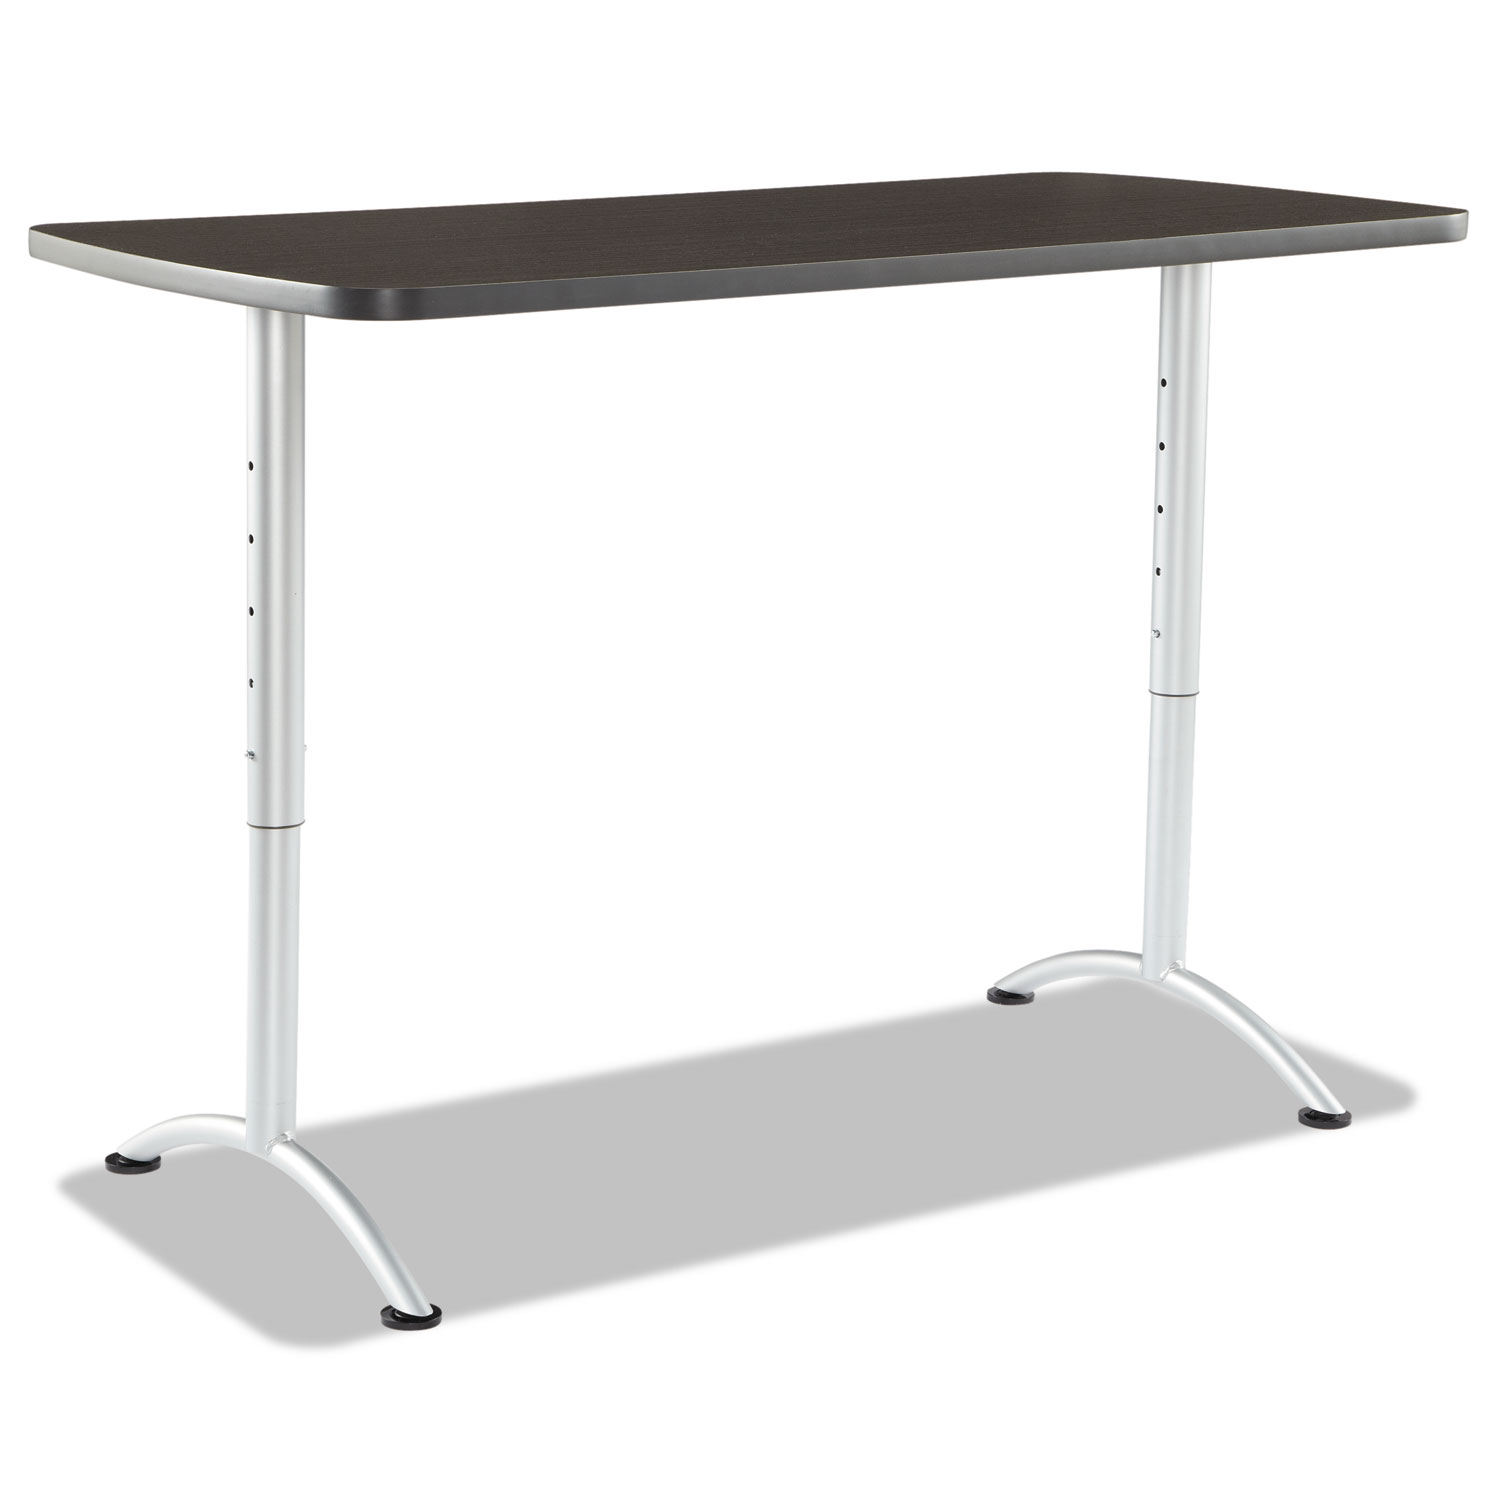 ARC Sit-to-Stand Tables, Rectangular Top, 30w x 60d x 30-42h, Gray Walnut/Silver